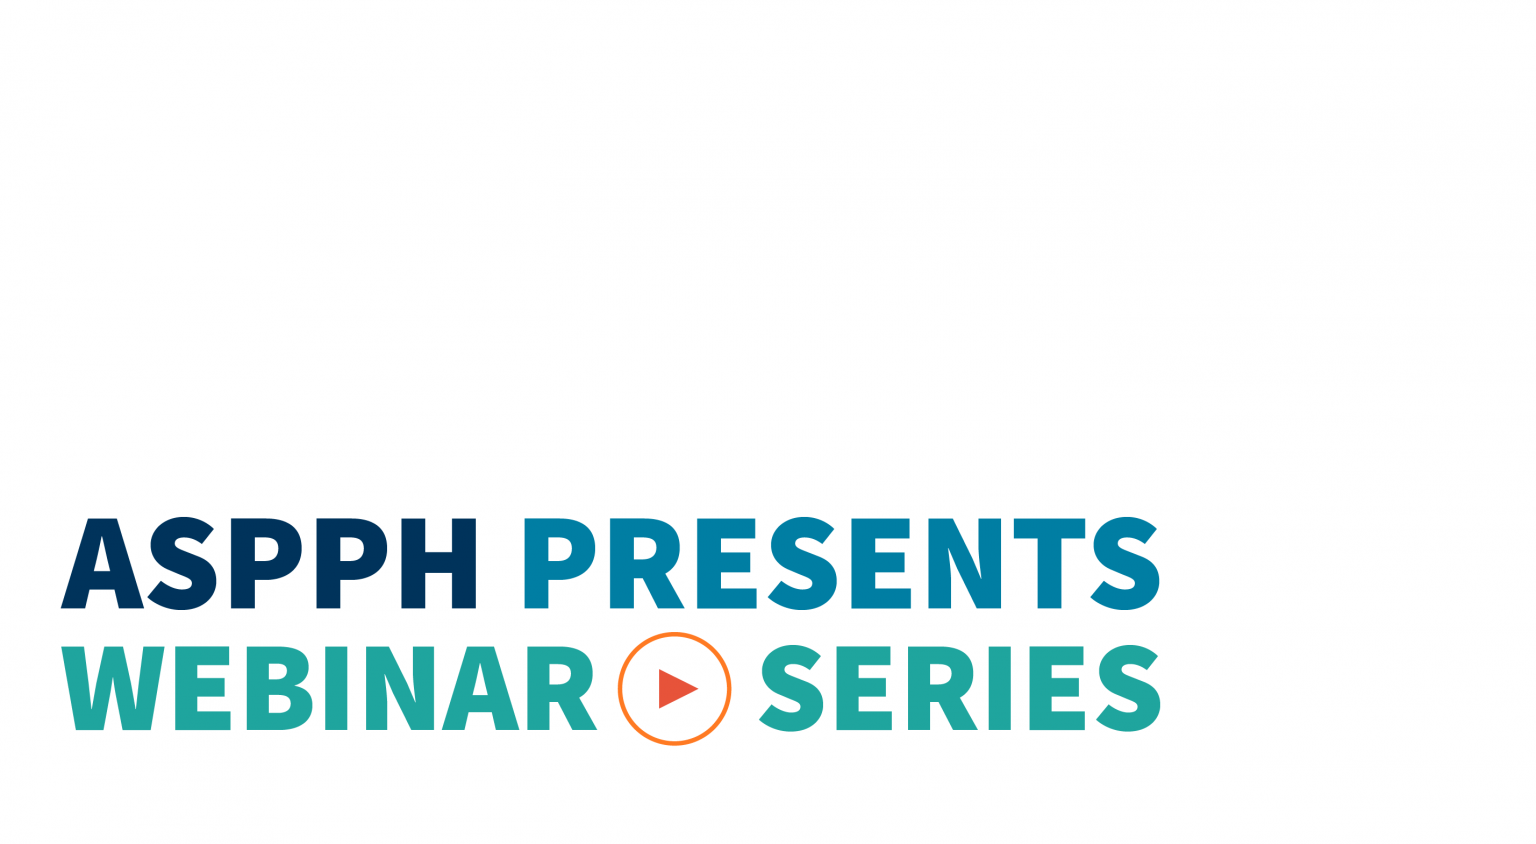 ASPPHASPPH Presents Webinar How Students Can Get Involved Now